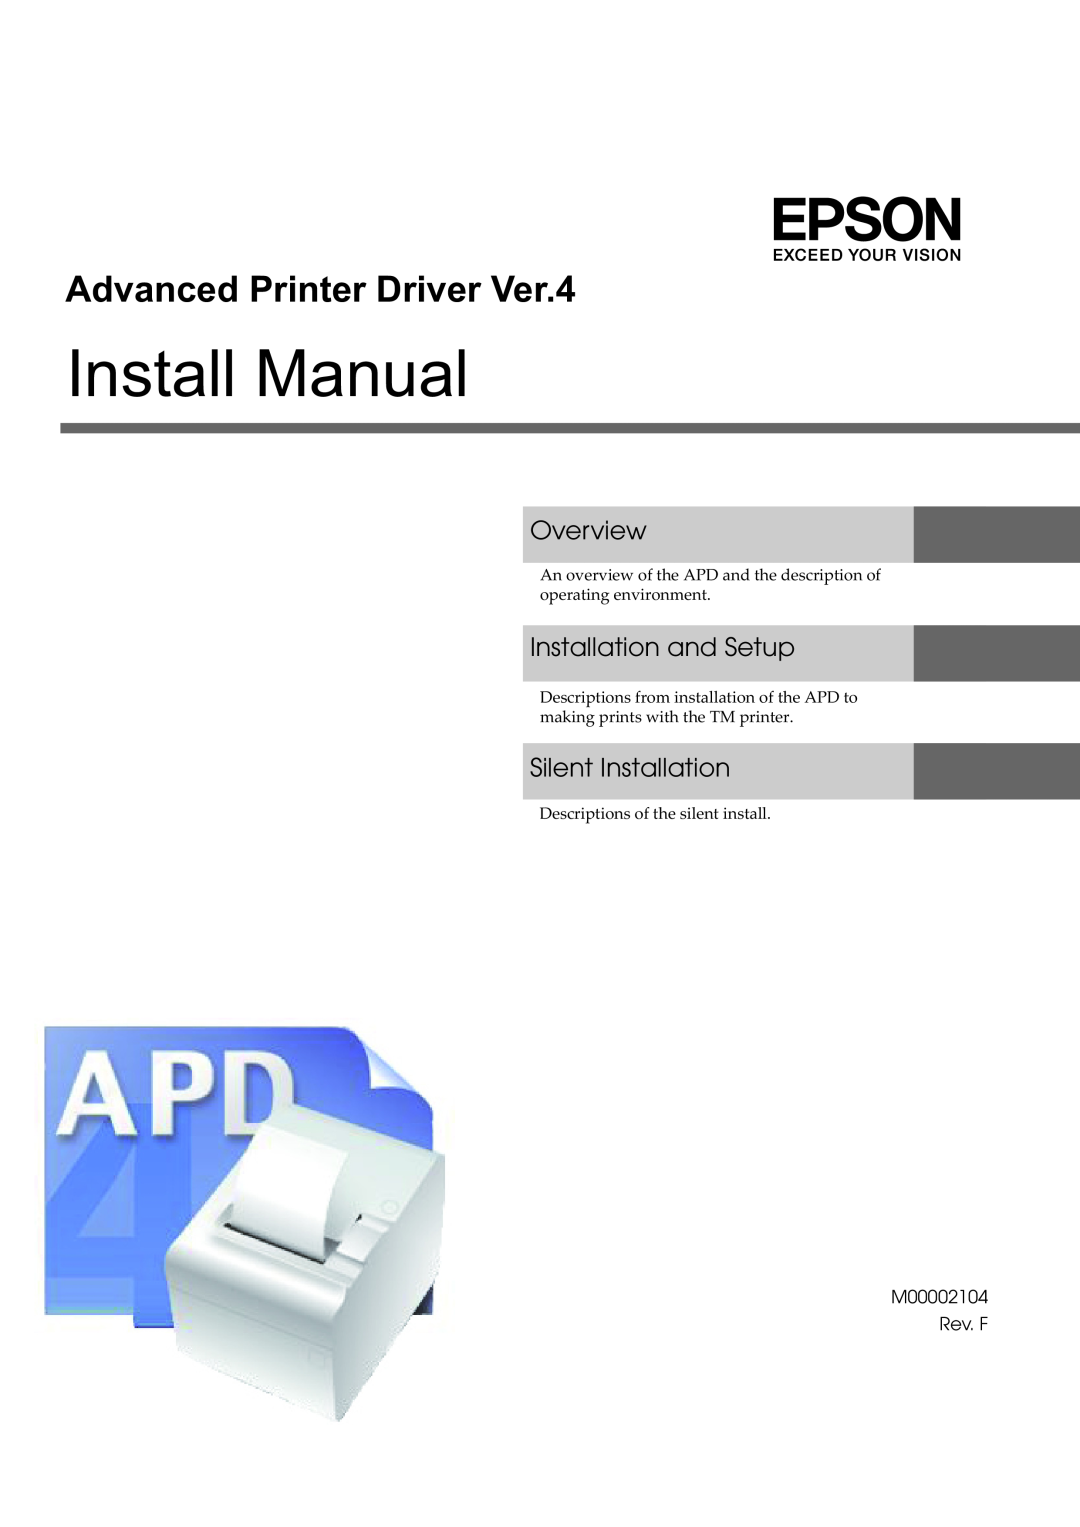 Epson M00002104 install manual Overview, Installation and Setup, Silent Installation, Install Manual 